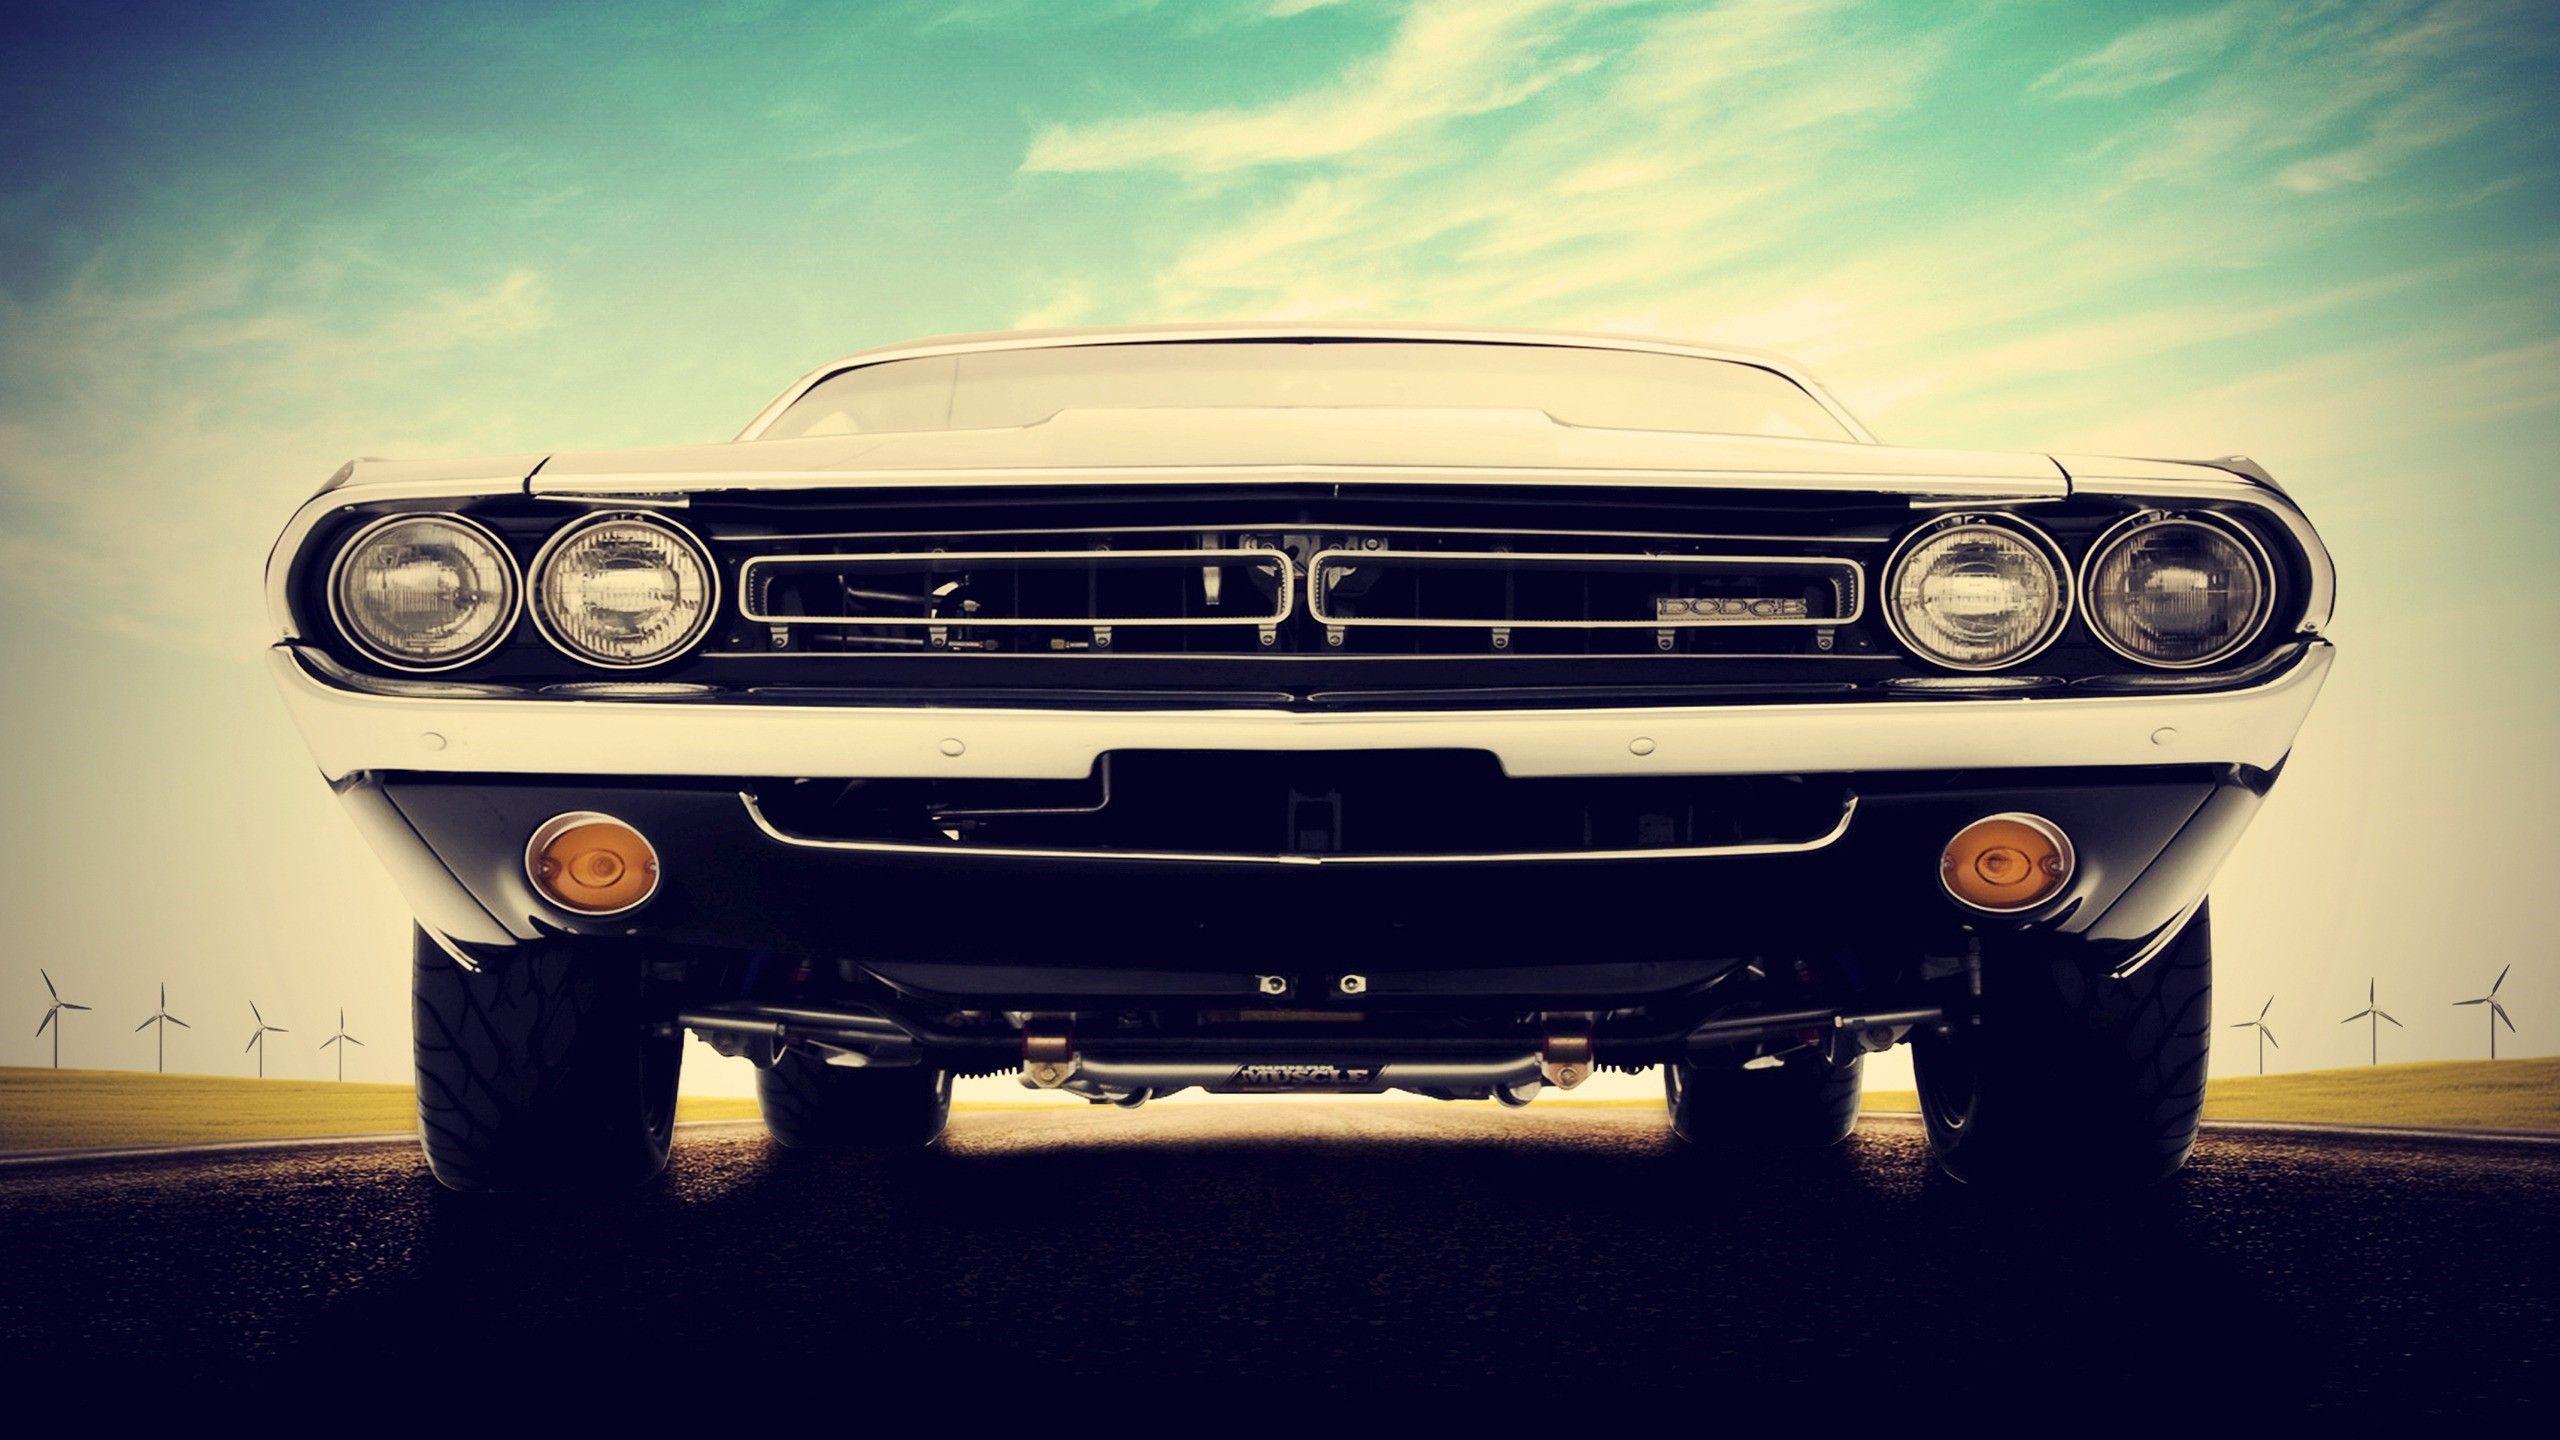 Car dodge dodge challenger muscle cars wallpapers and backgrounds